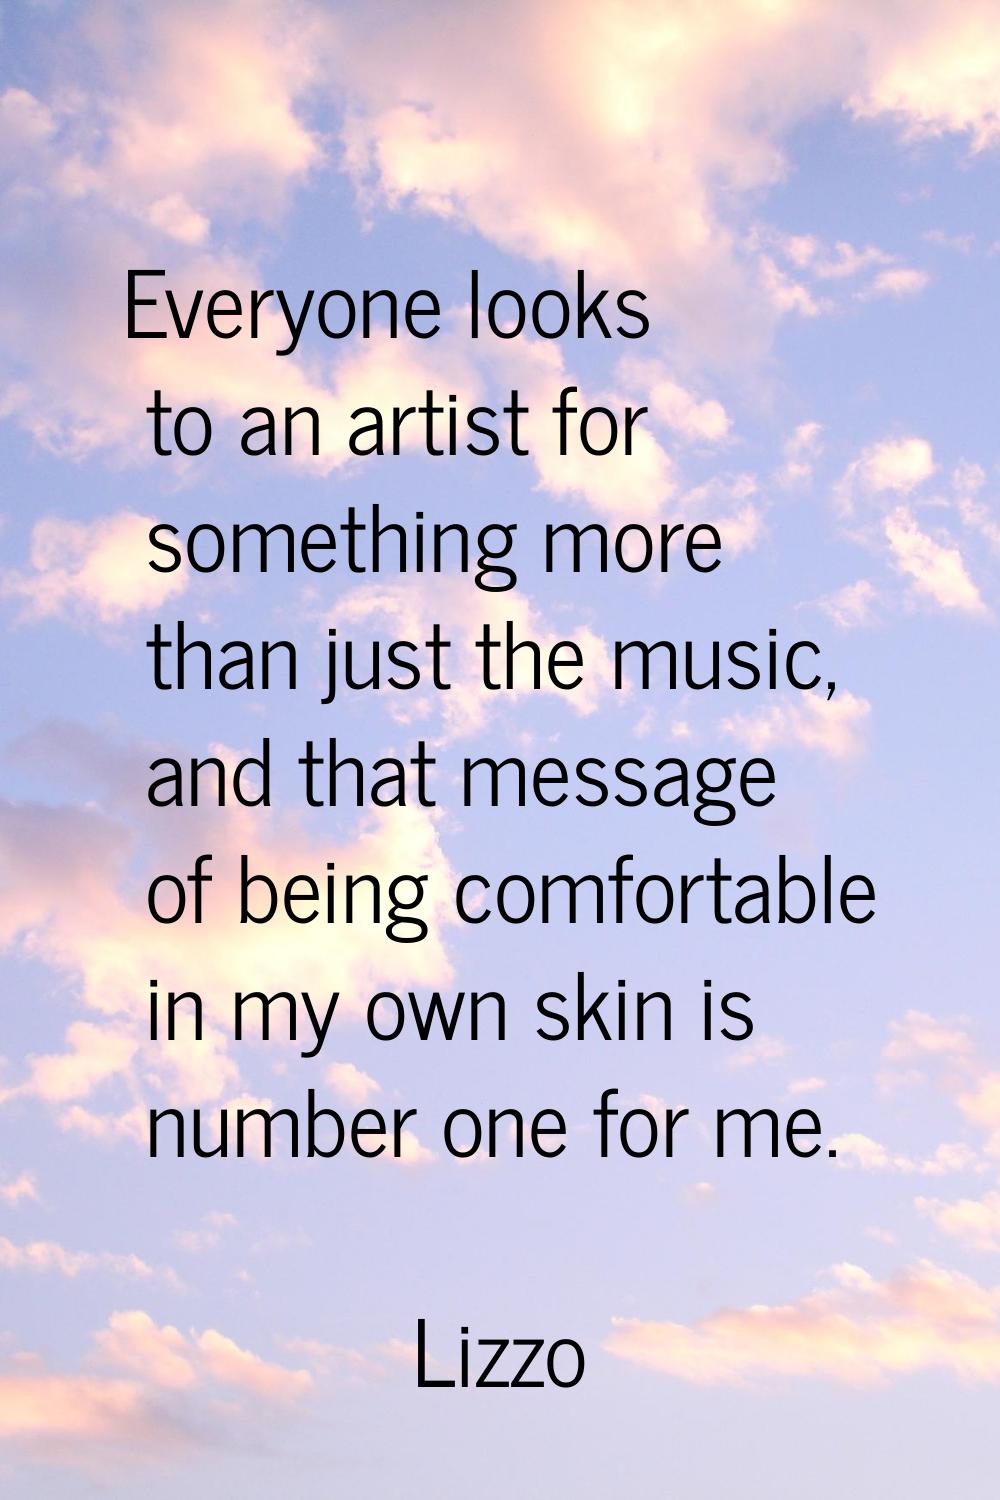 Everyone looks to an artist for something more than just the music, and that message of being comfo